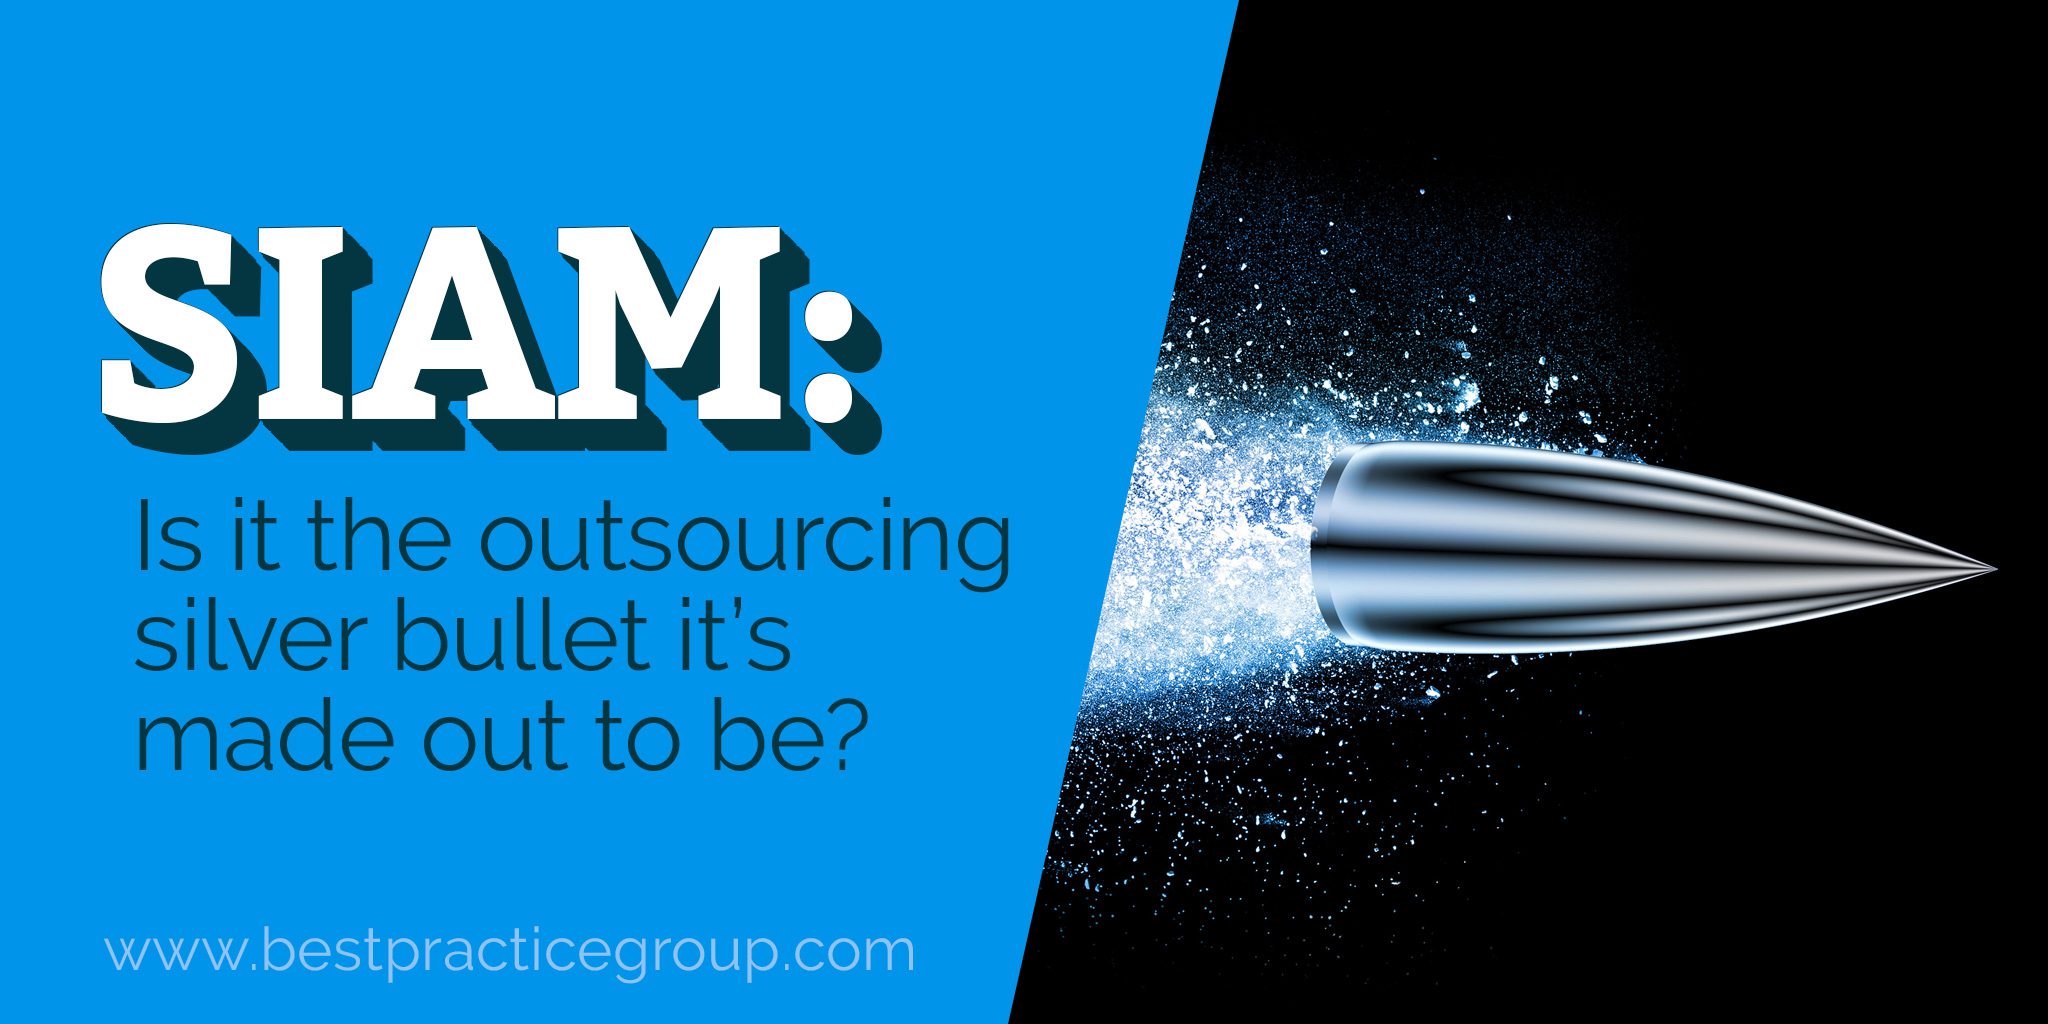 SIAM – Is it really the outsourcing silver bullet it’s made out to be?